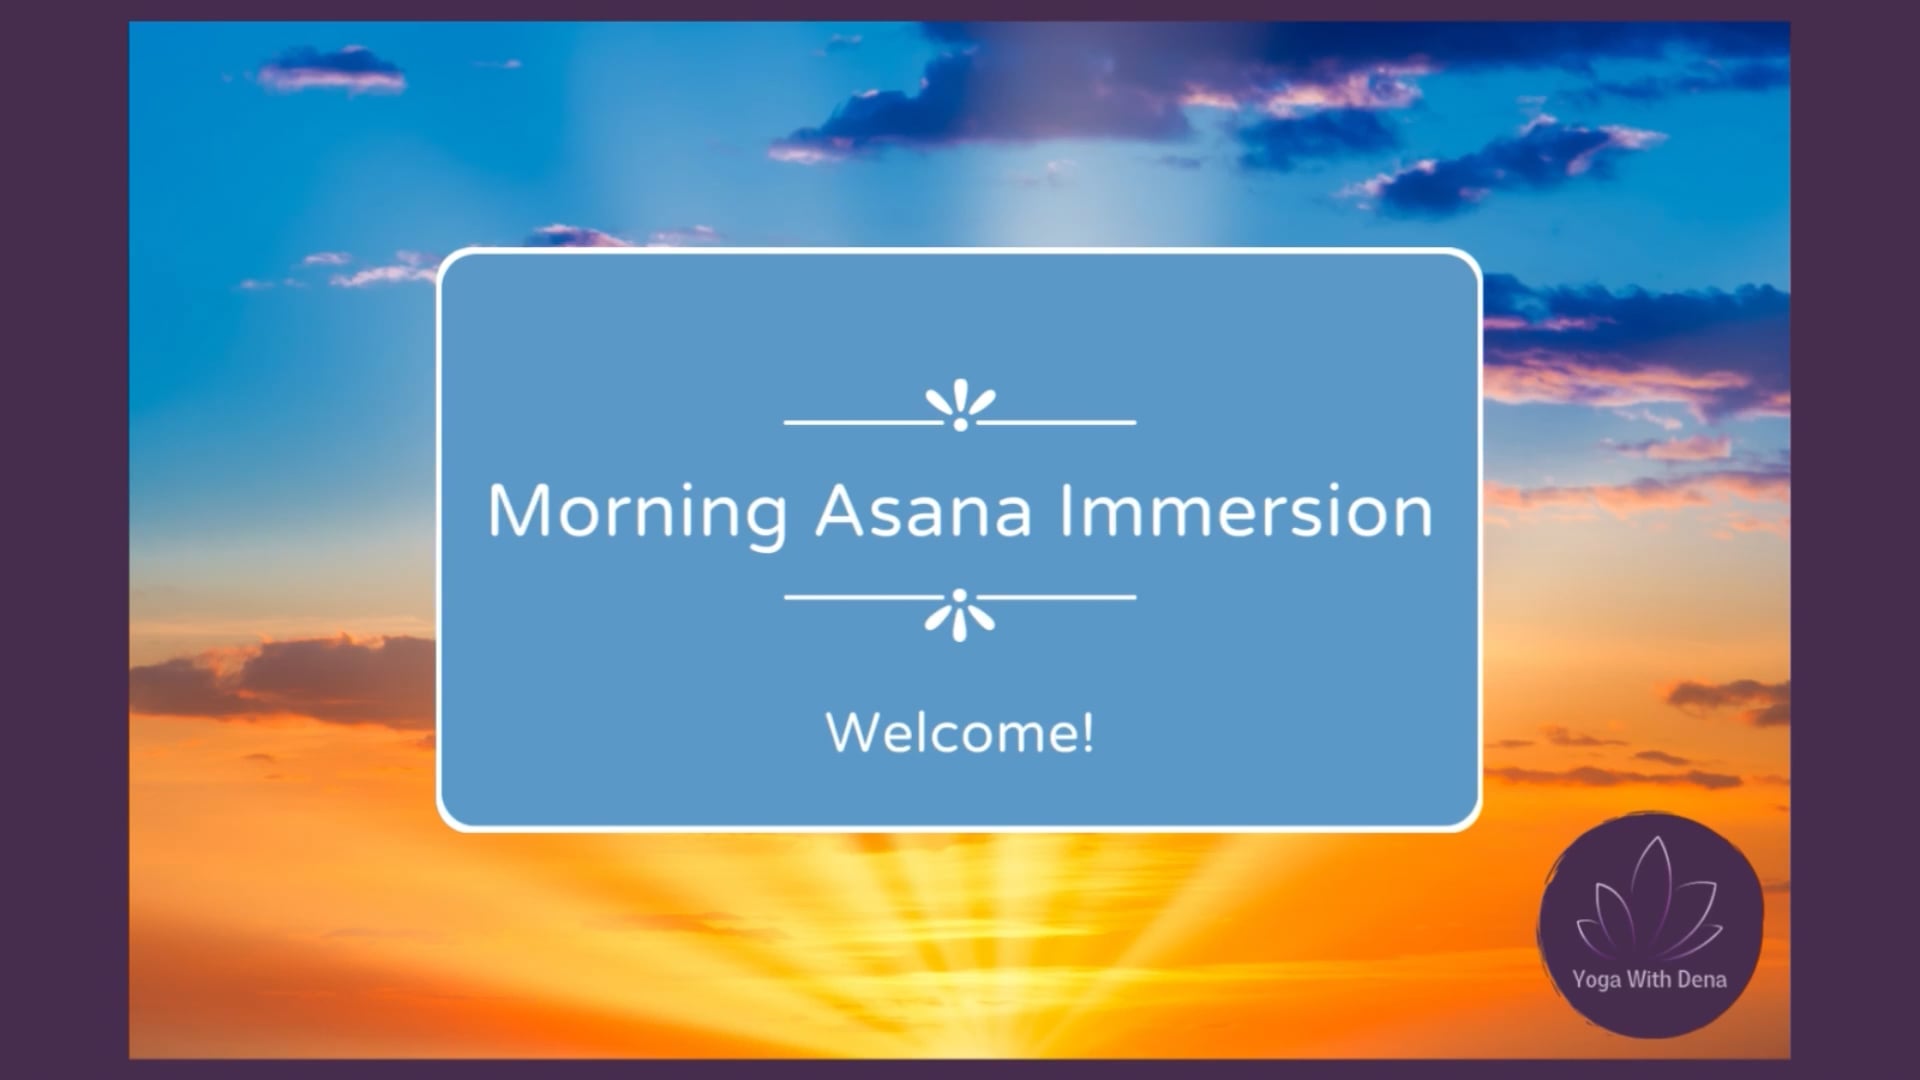 Welcome Video - Morning Asana Immersion